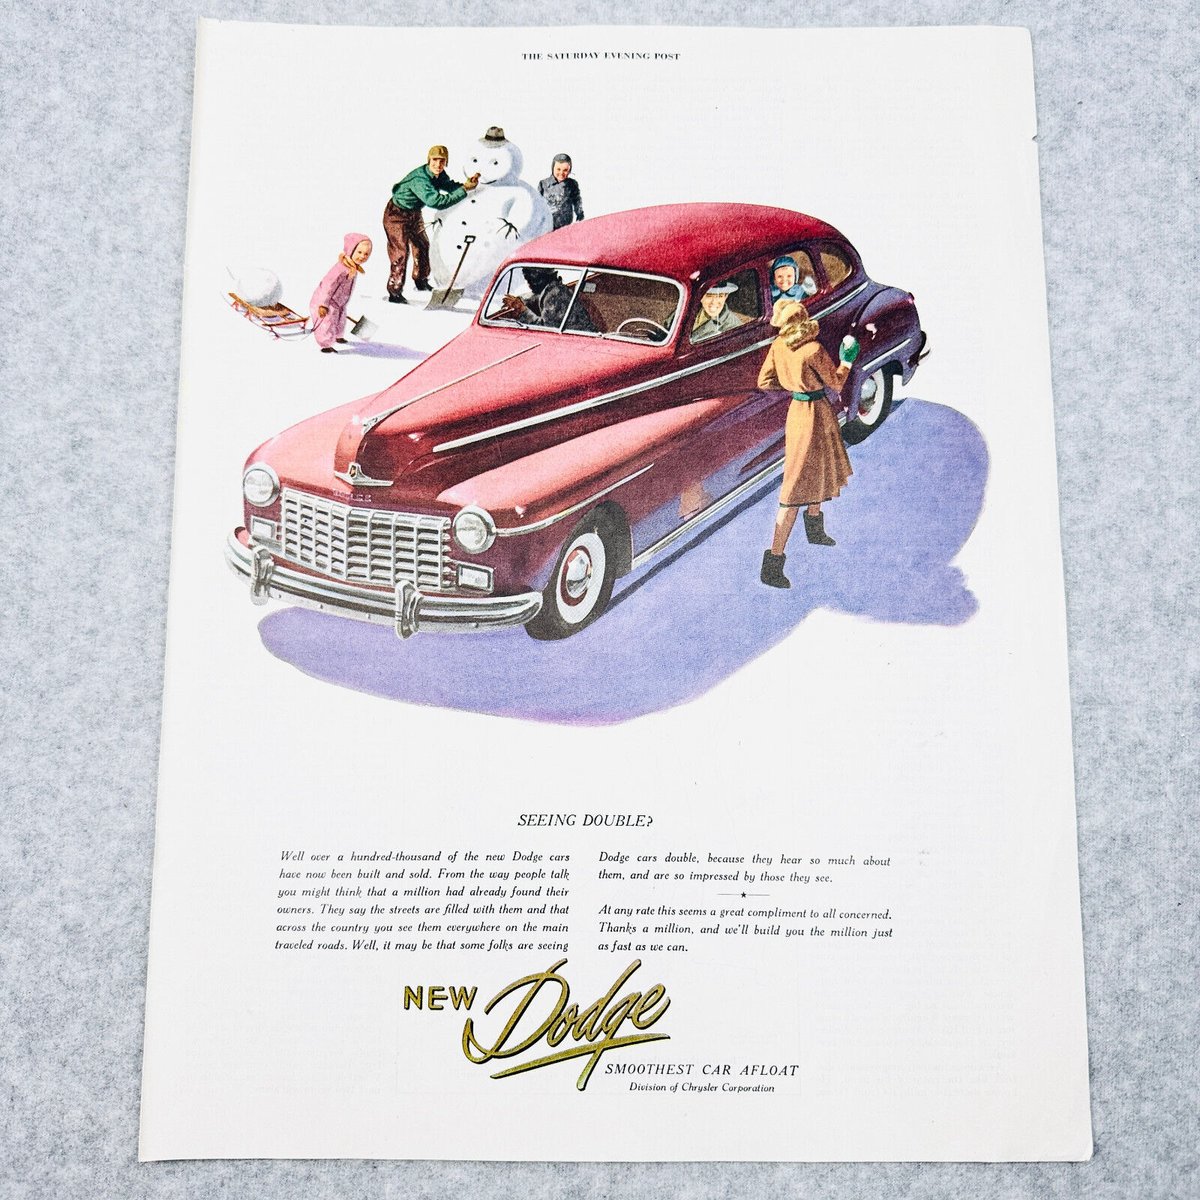 Who decided that cars nowadays should be boring instead of bold and colorful? I mean, why can't we drive this kind of car?? #dodge #car #vintage #printad #advertisement #vtg #ephemera #vintage40s #chrysler #forsale #ebay #shopsmall 
ebay.com/itm/2667848681…